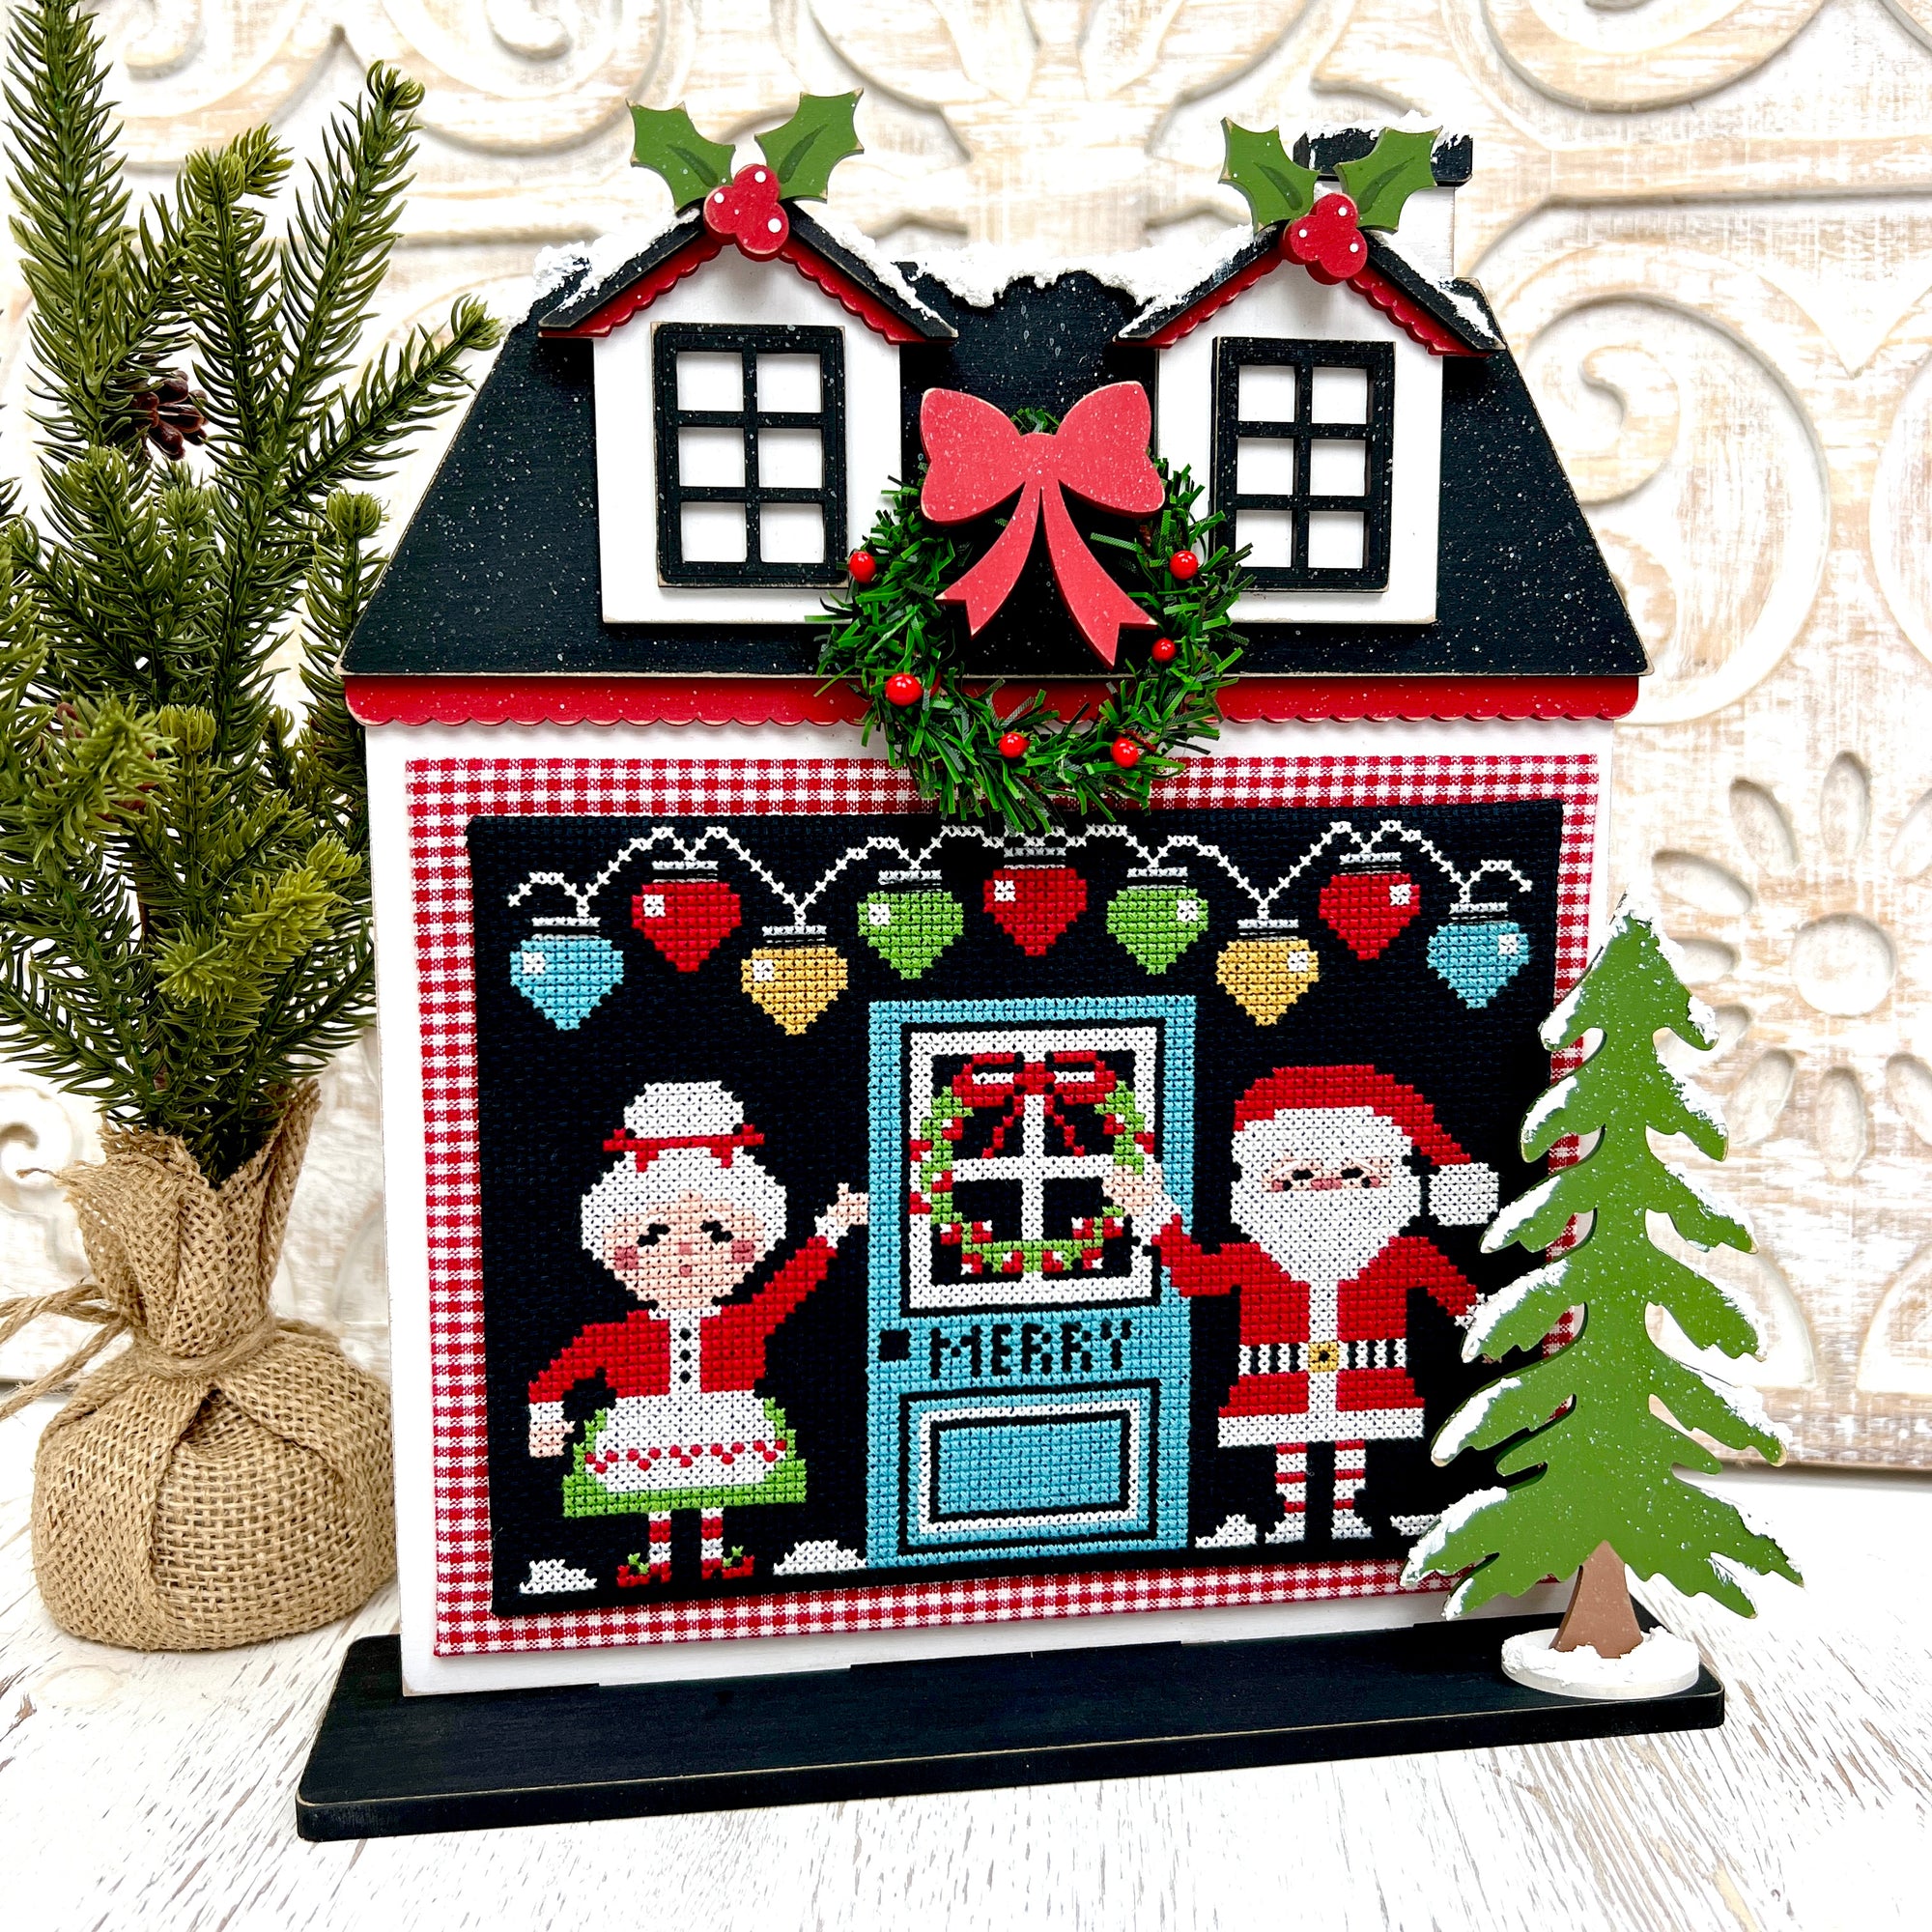 Christmas house wood cross stitch display backer. aDOORables cross stitch by Stitching with the Housewives